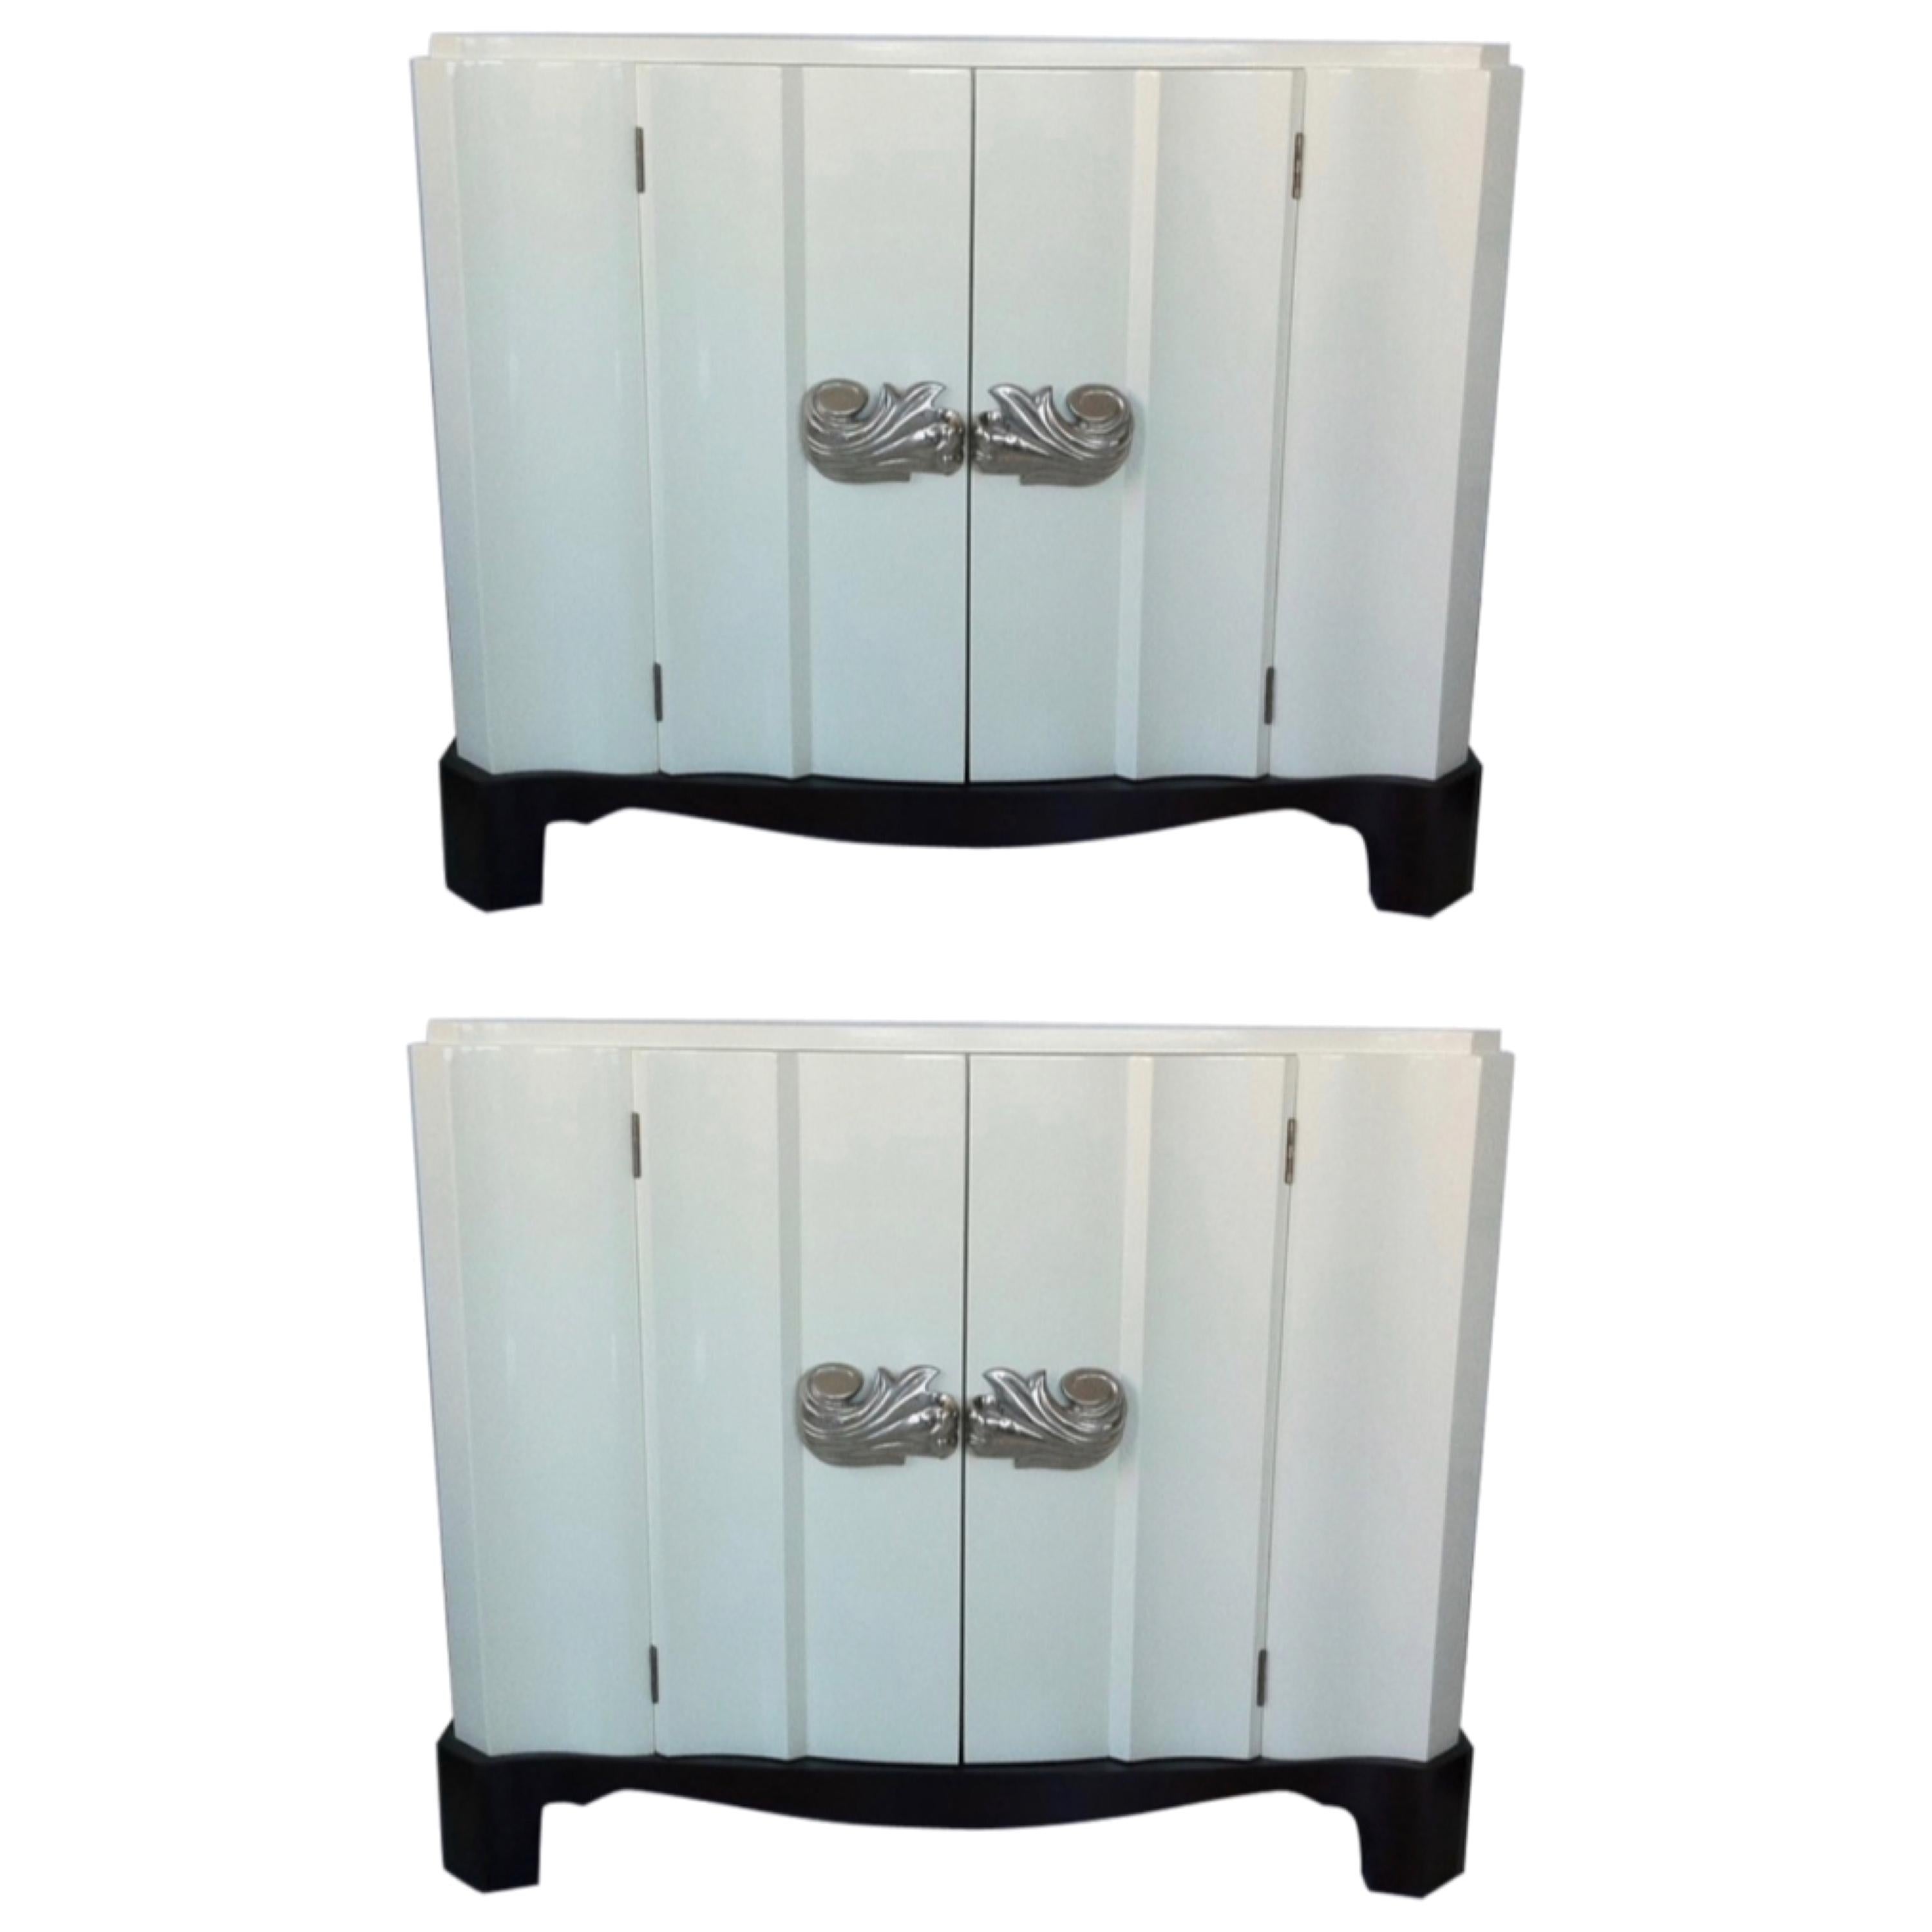 Pair of Dorothy Draper Serpentine Chests in Ivory Lacquer with Nickel Pulls